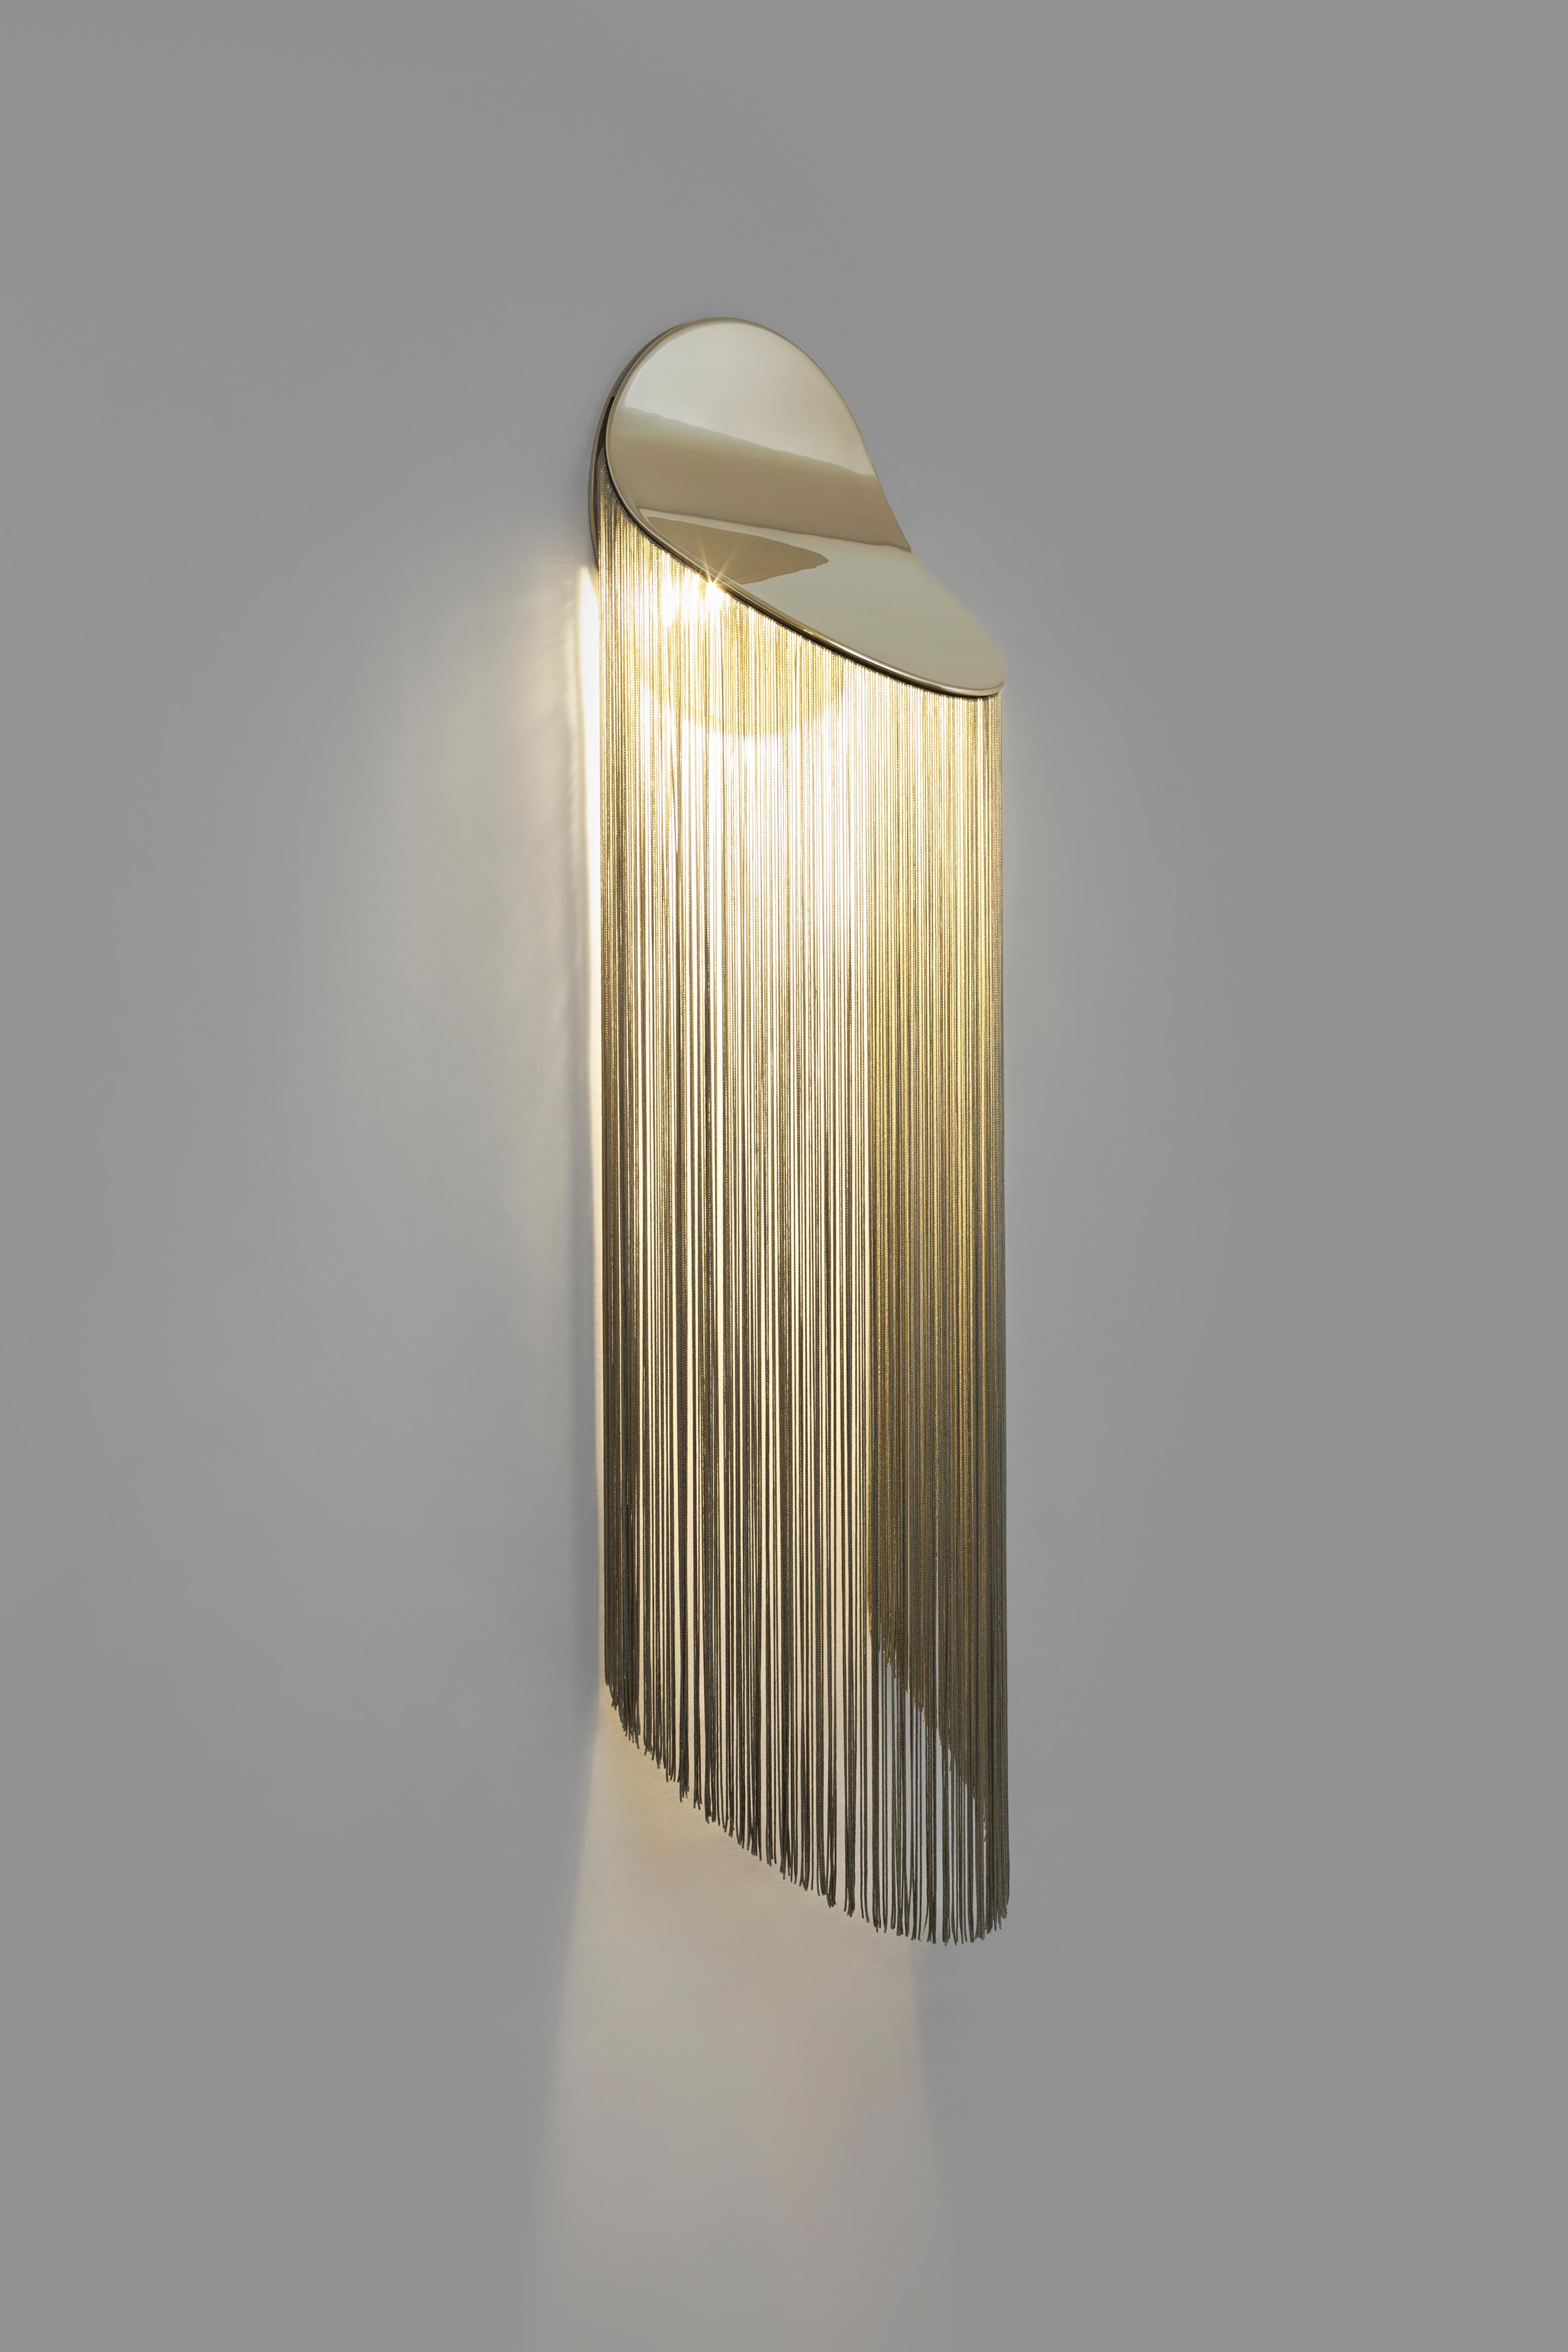 Cé audaciously blends fringes and solid bronze revealing a well-rounded wall-mounted fixture. The unique movement of the fringes brings a fluid effect, distinguishing this piece from previous collections, all the while remaining faithful to the